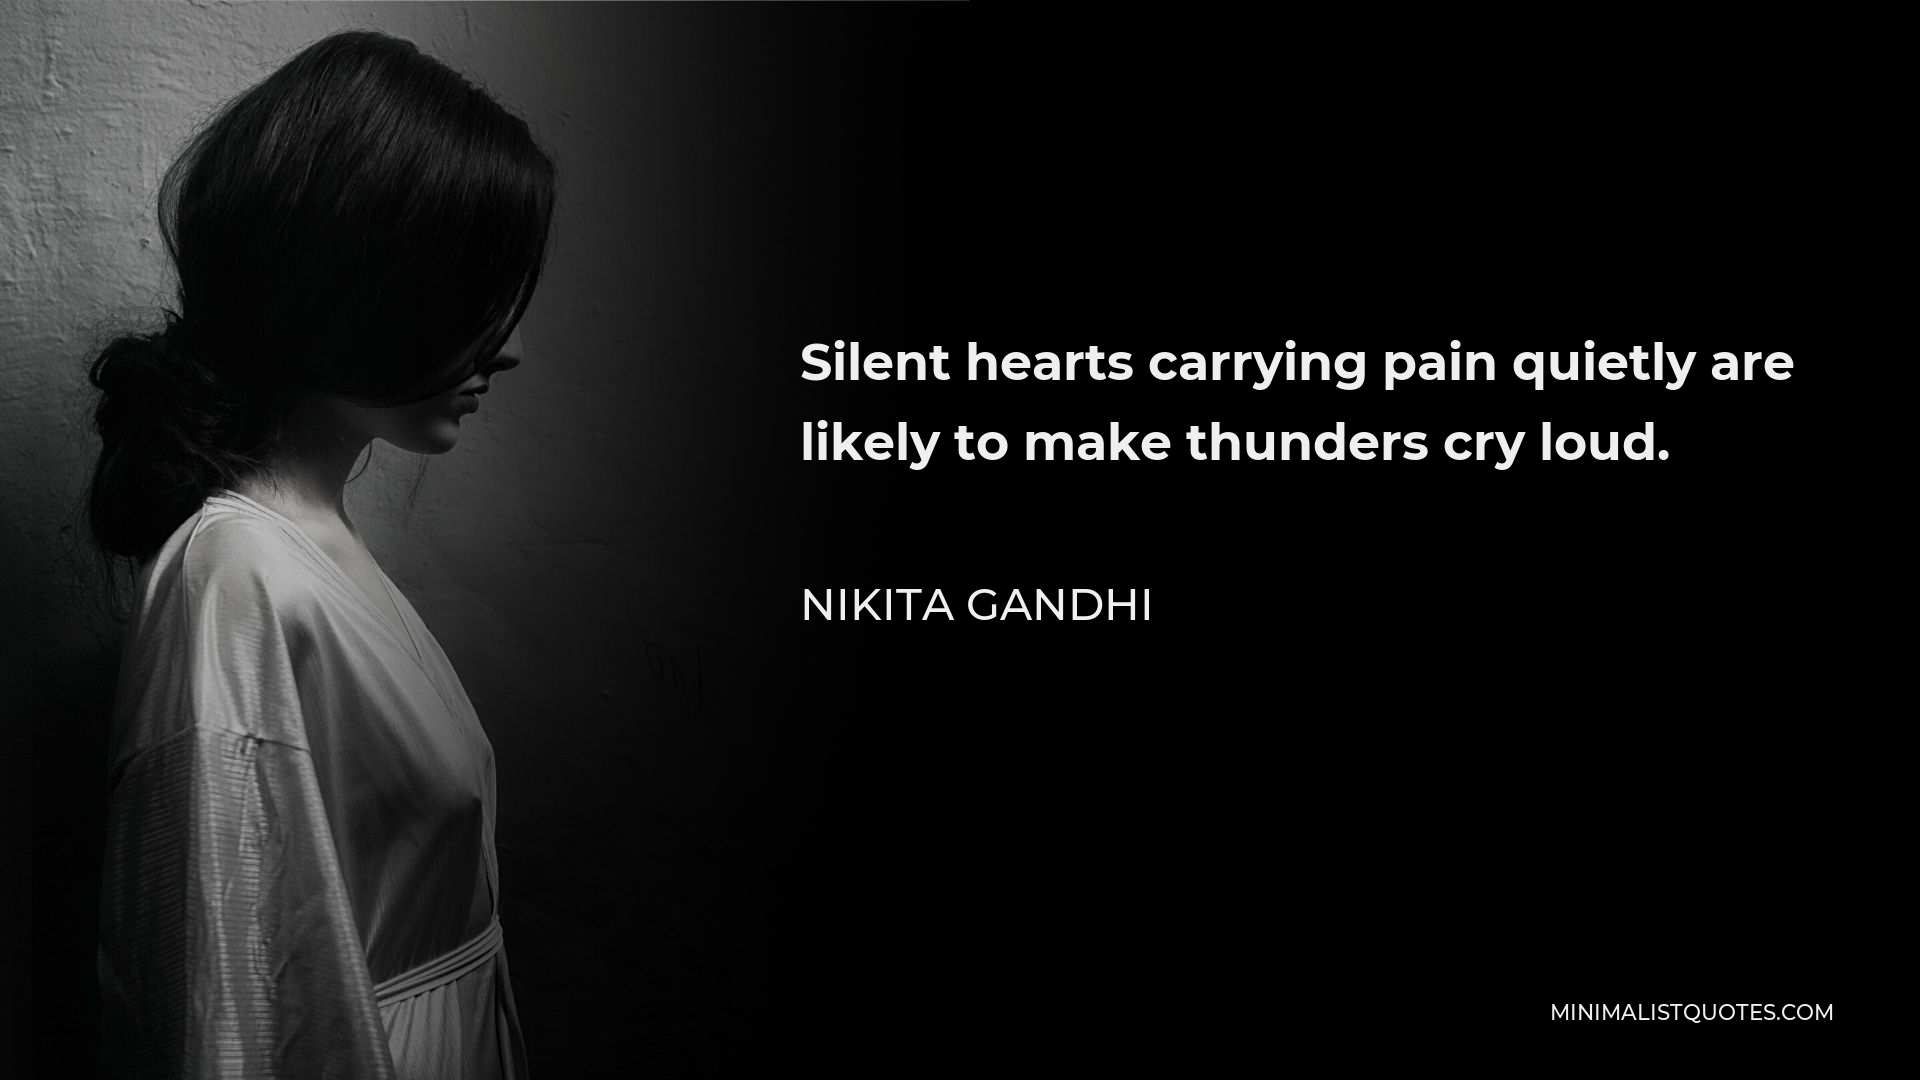 Nikita Gandhi Quote - Silent hearts carrying pain quietly are likely to make thunders cry loud.